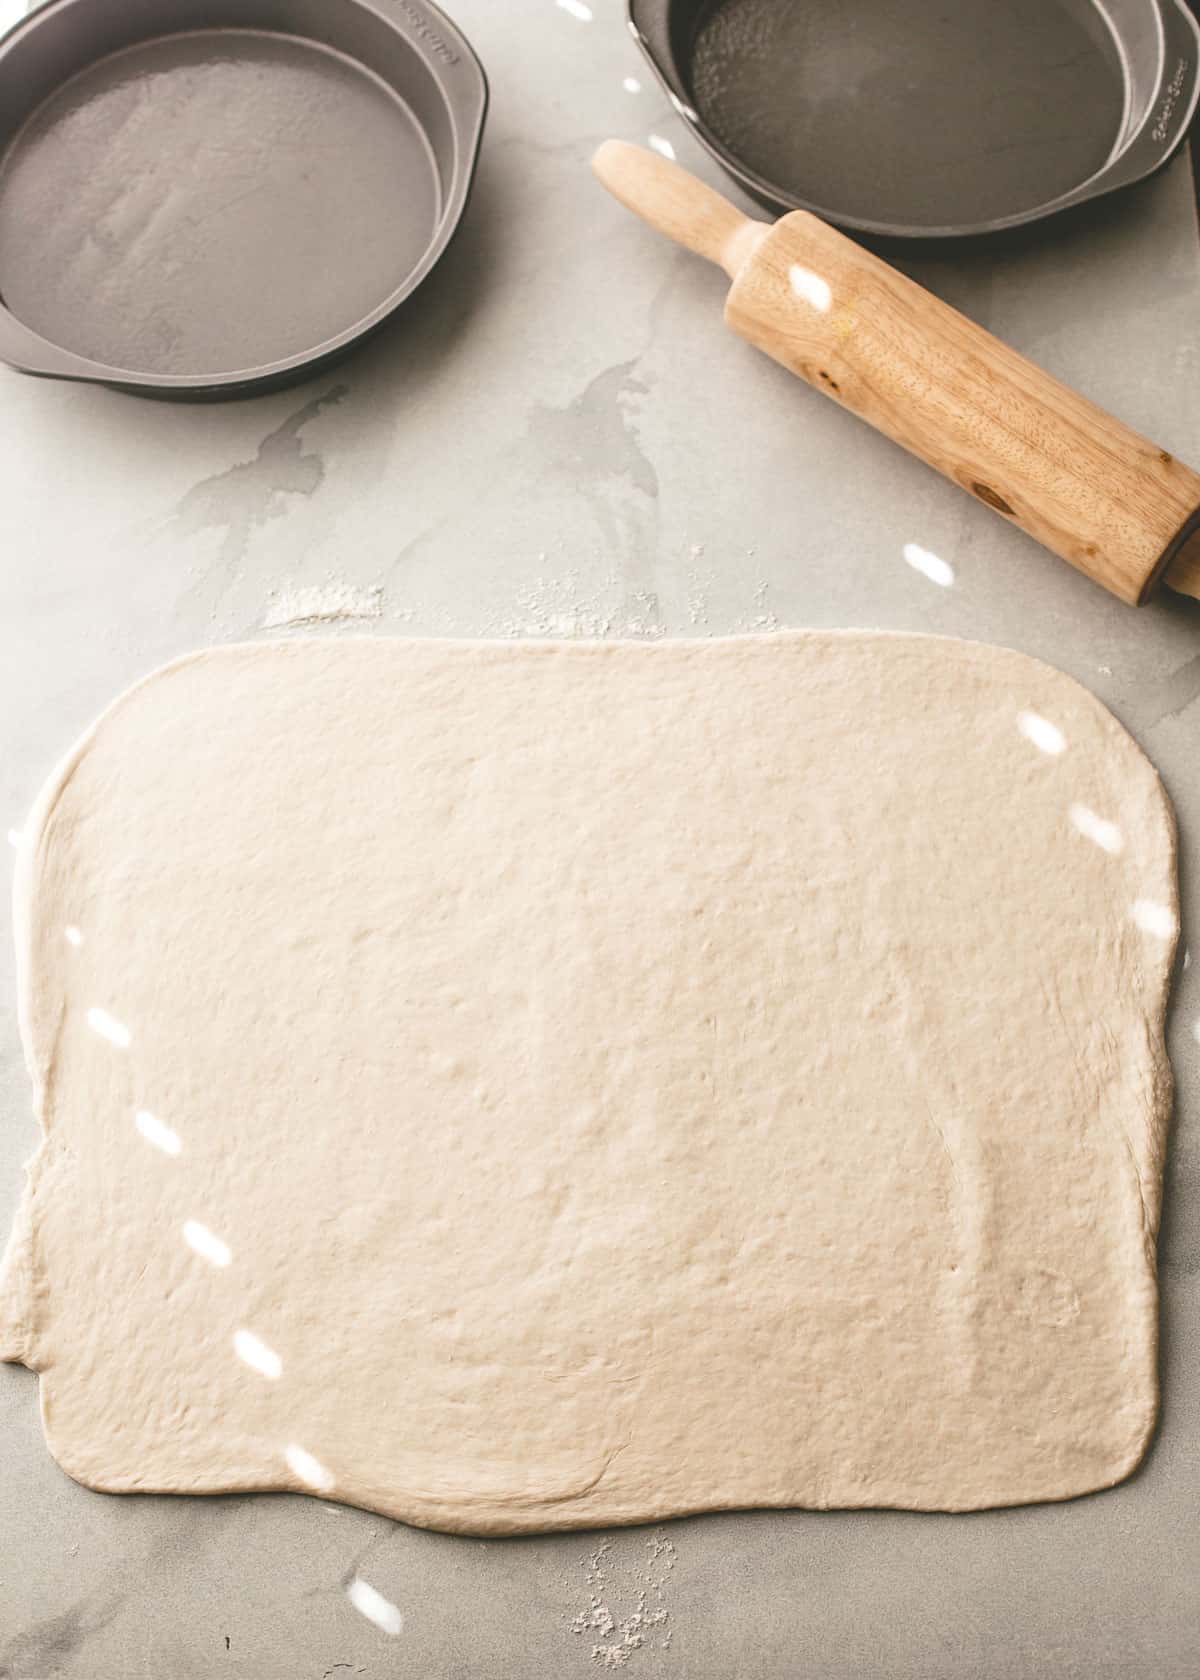 rolling dough out into a rectangle